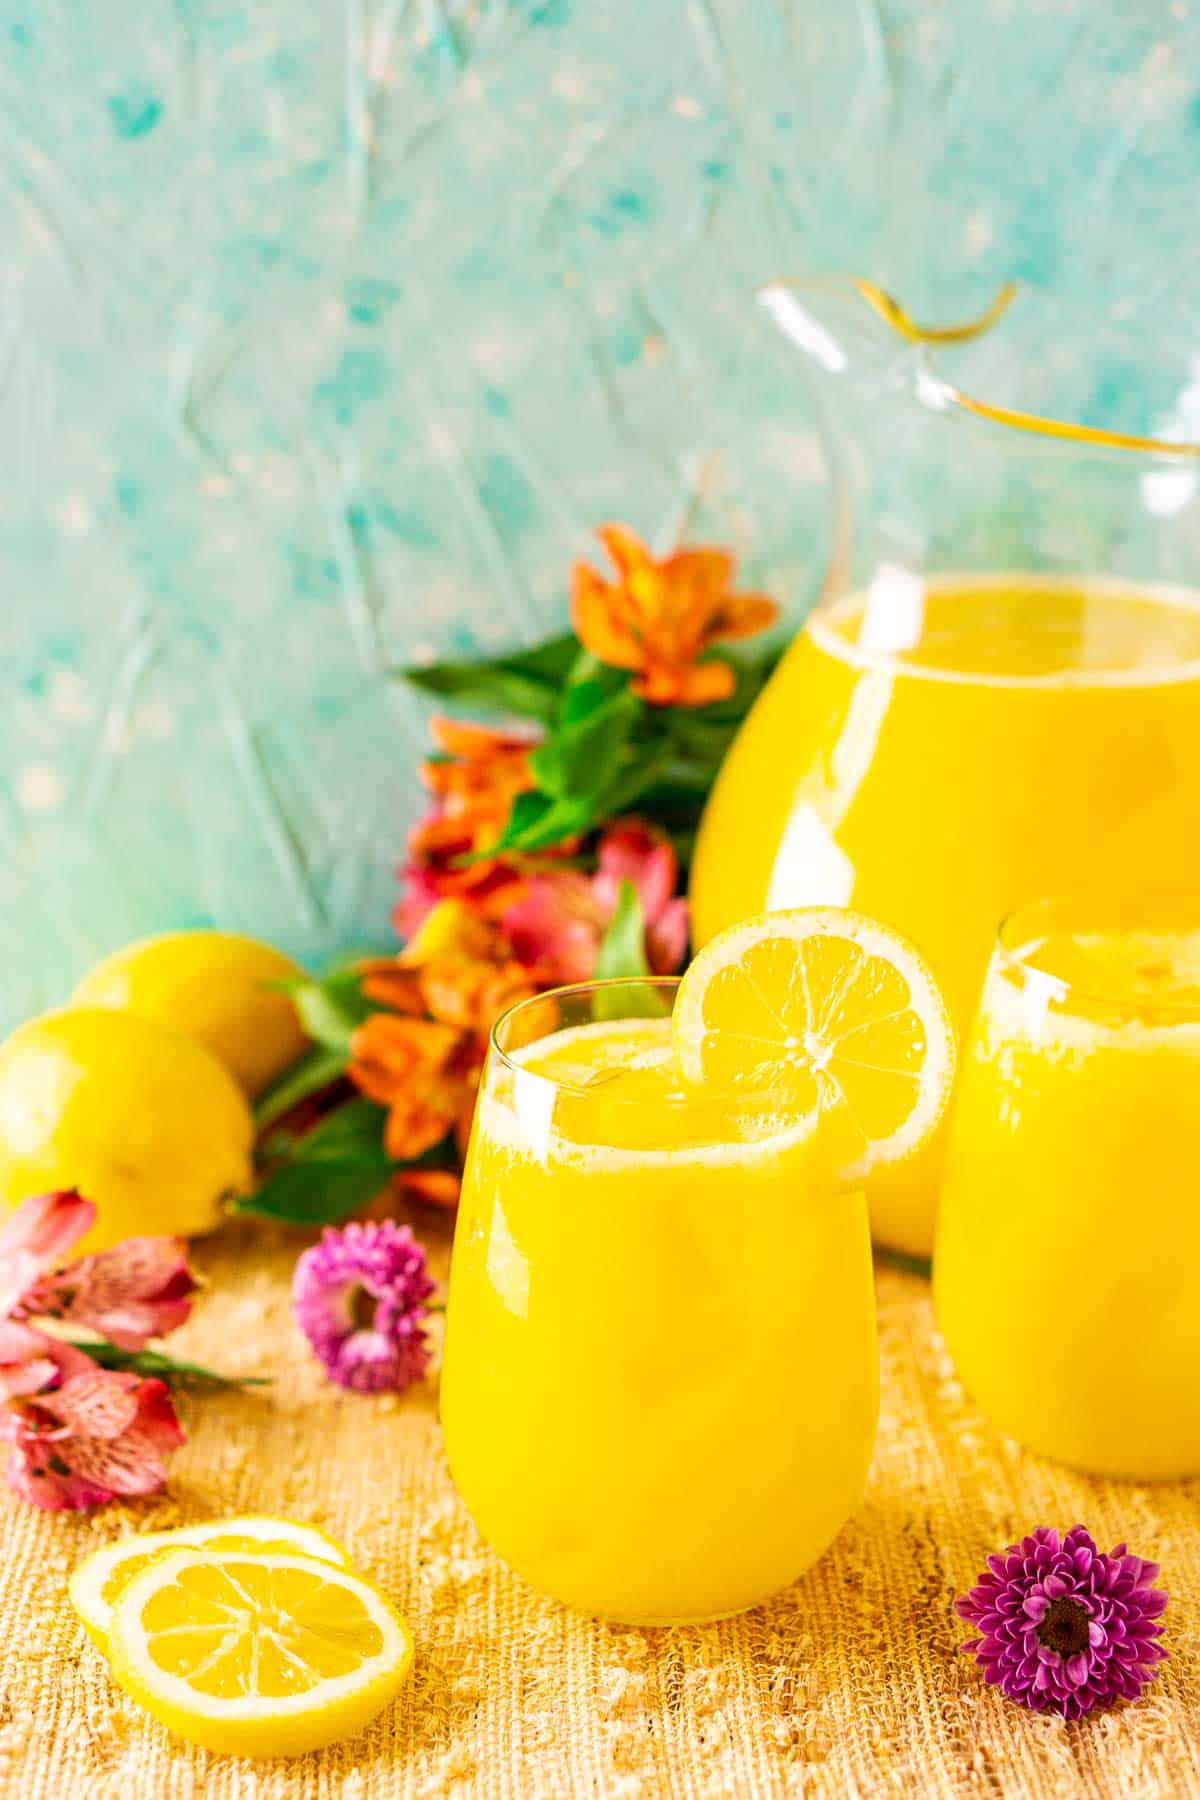 Looking down on a glass of mango lemonade with tropical flowers around it and a pitcher to the right.